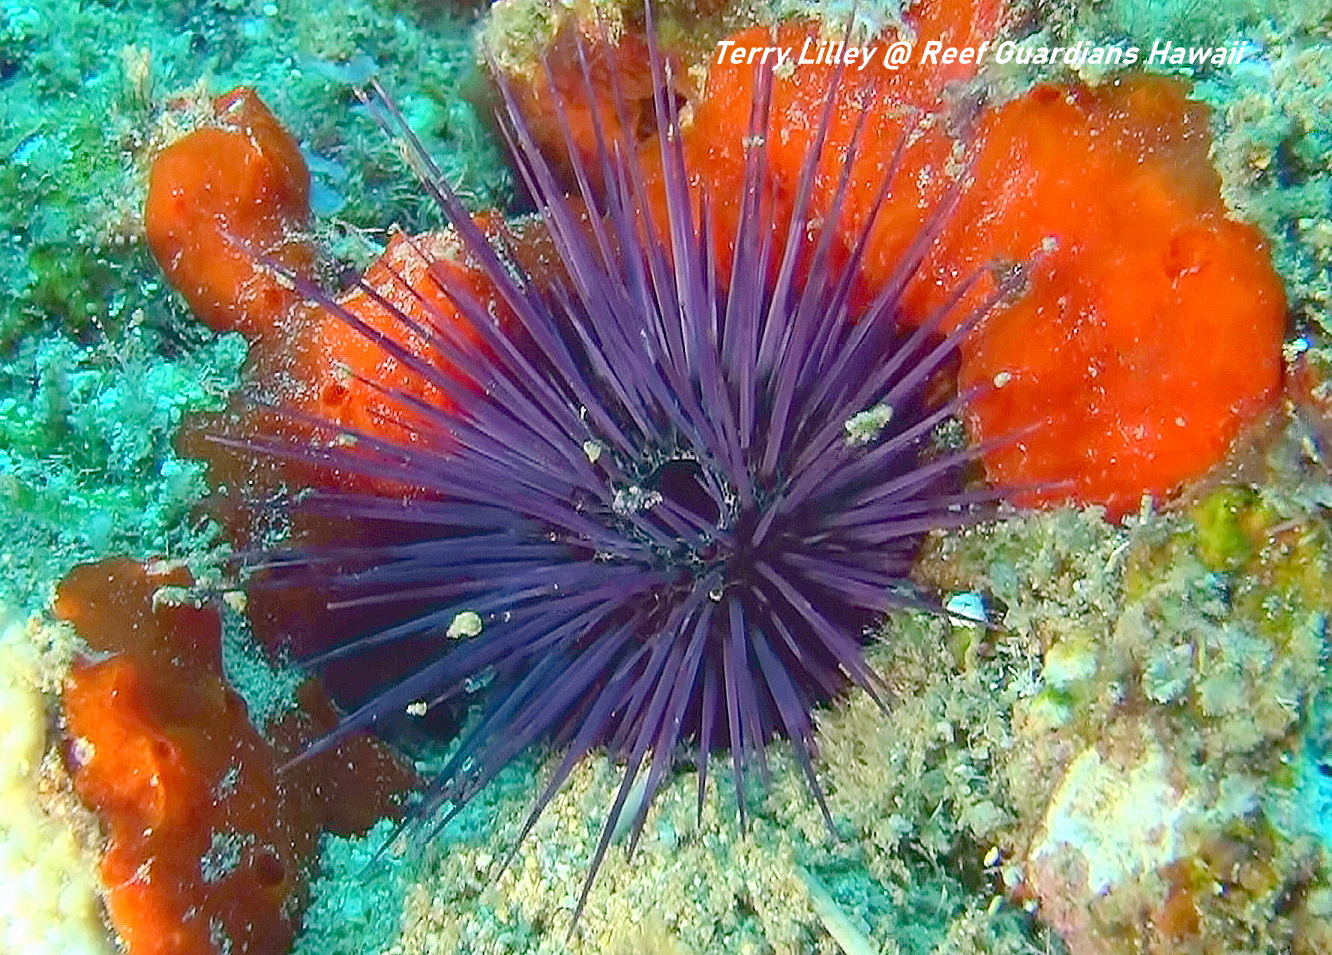 Needle-Spined Urchin